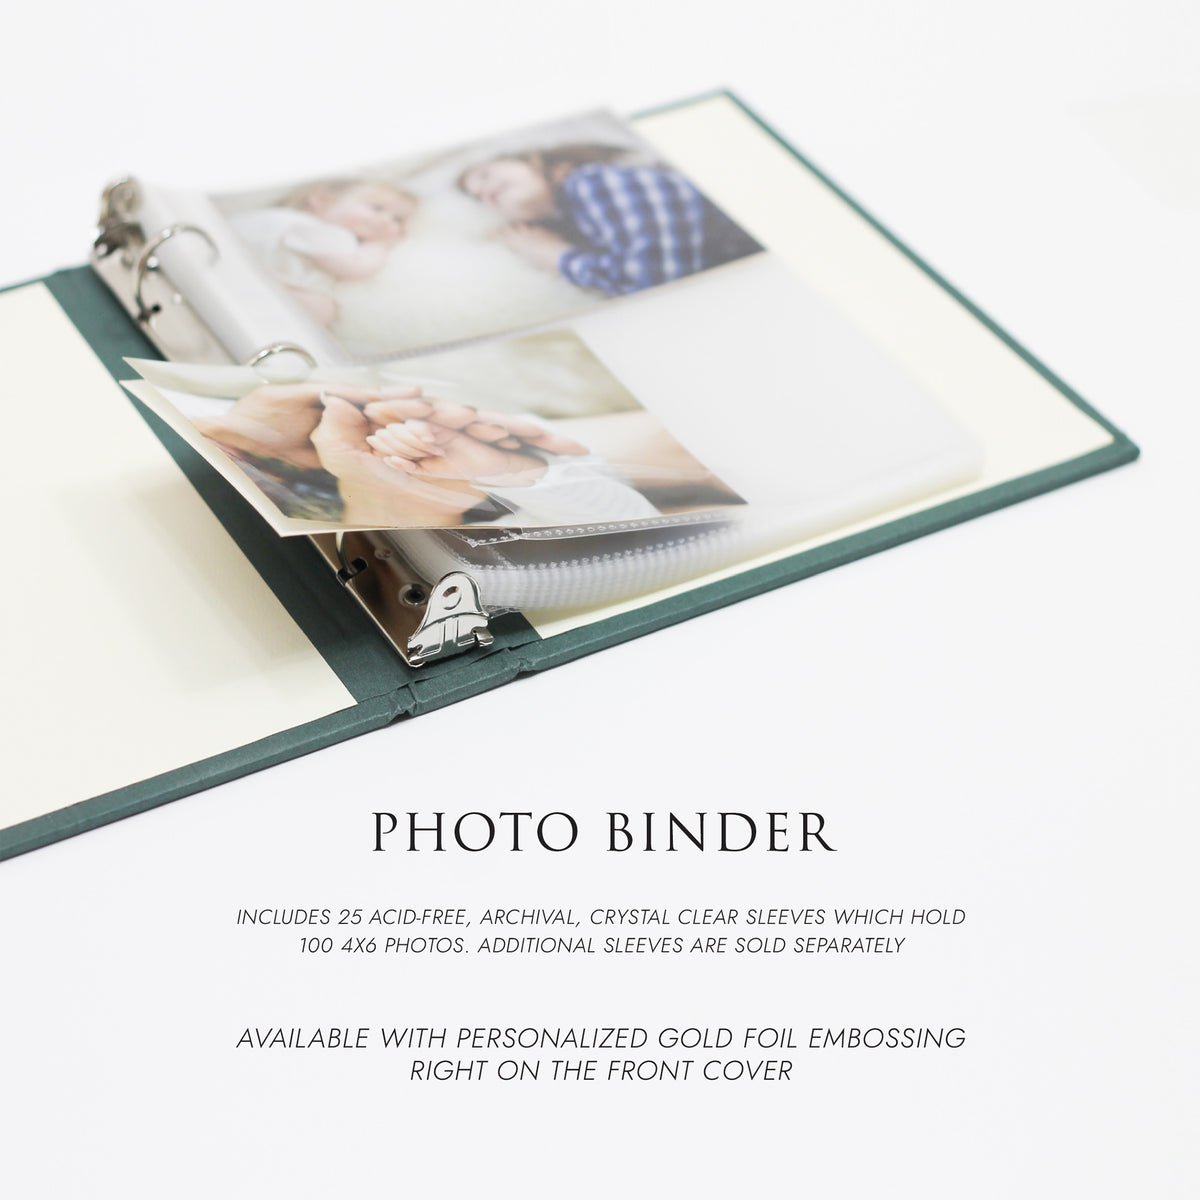 Medium Photo Binder For 4x6 Photos | Cover: Powder Blue Cotton | Available Personalized